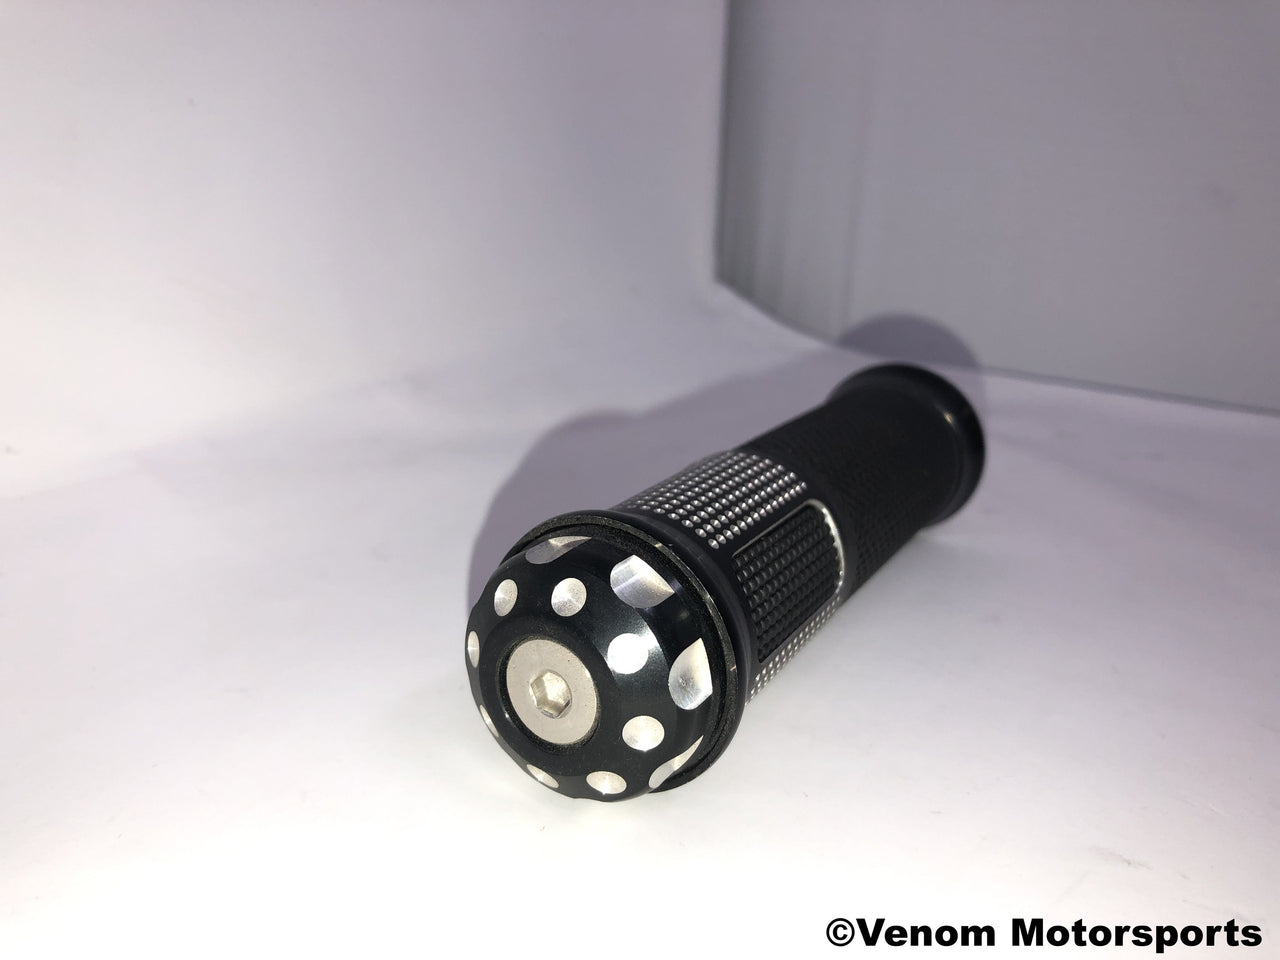 X18 50CC GY6 Motorcycle | Left & Right Handgrips (10020055 / 10020056)